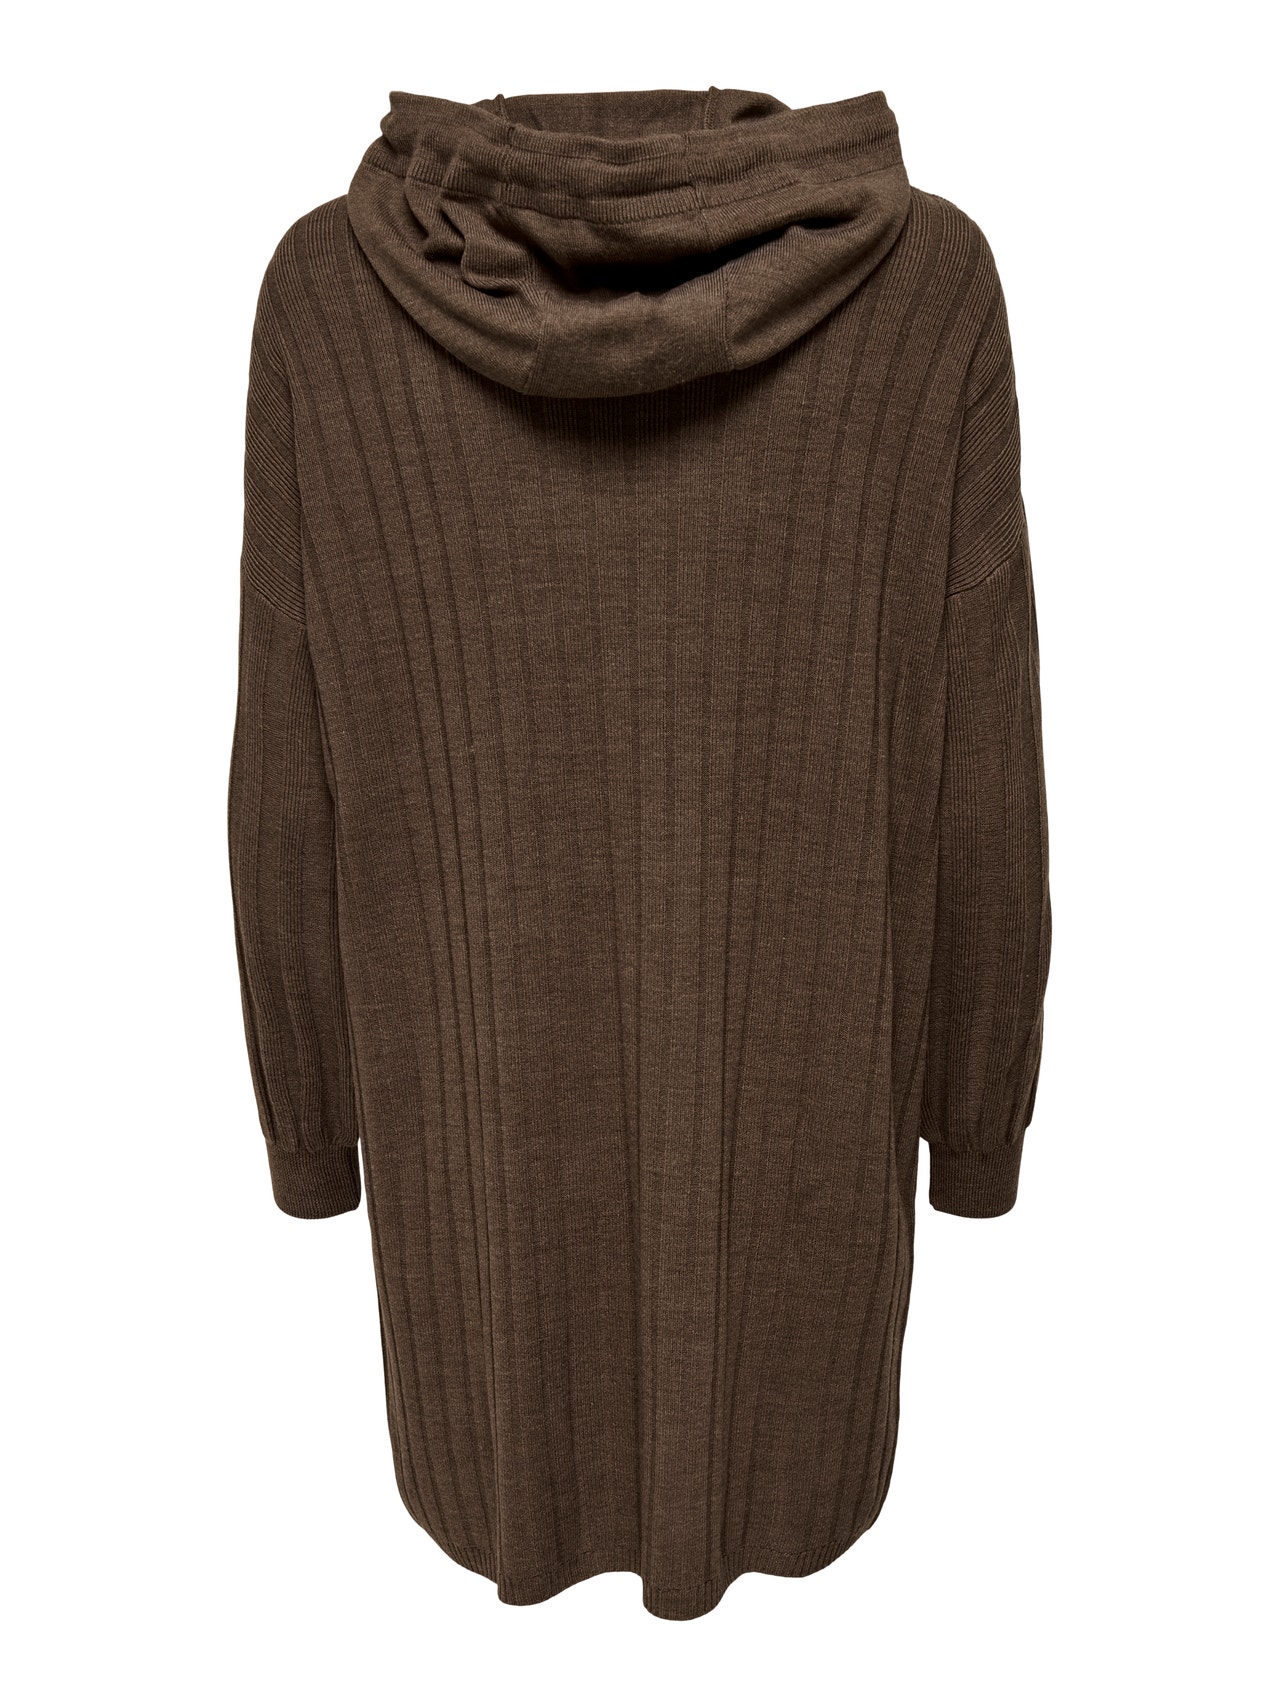 ONLY Knitted hoodie dress -Chestnut - 15267699